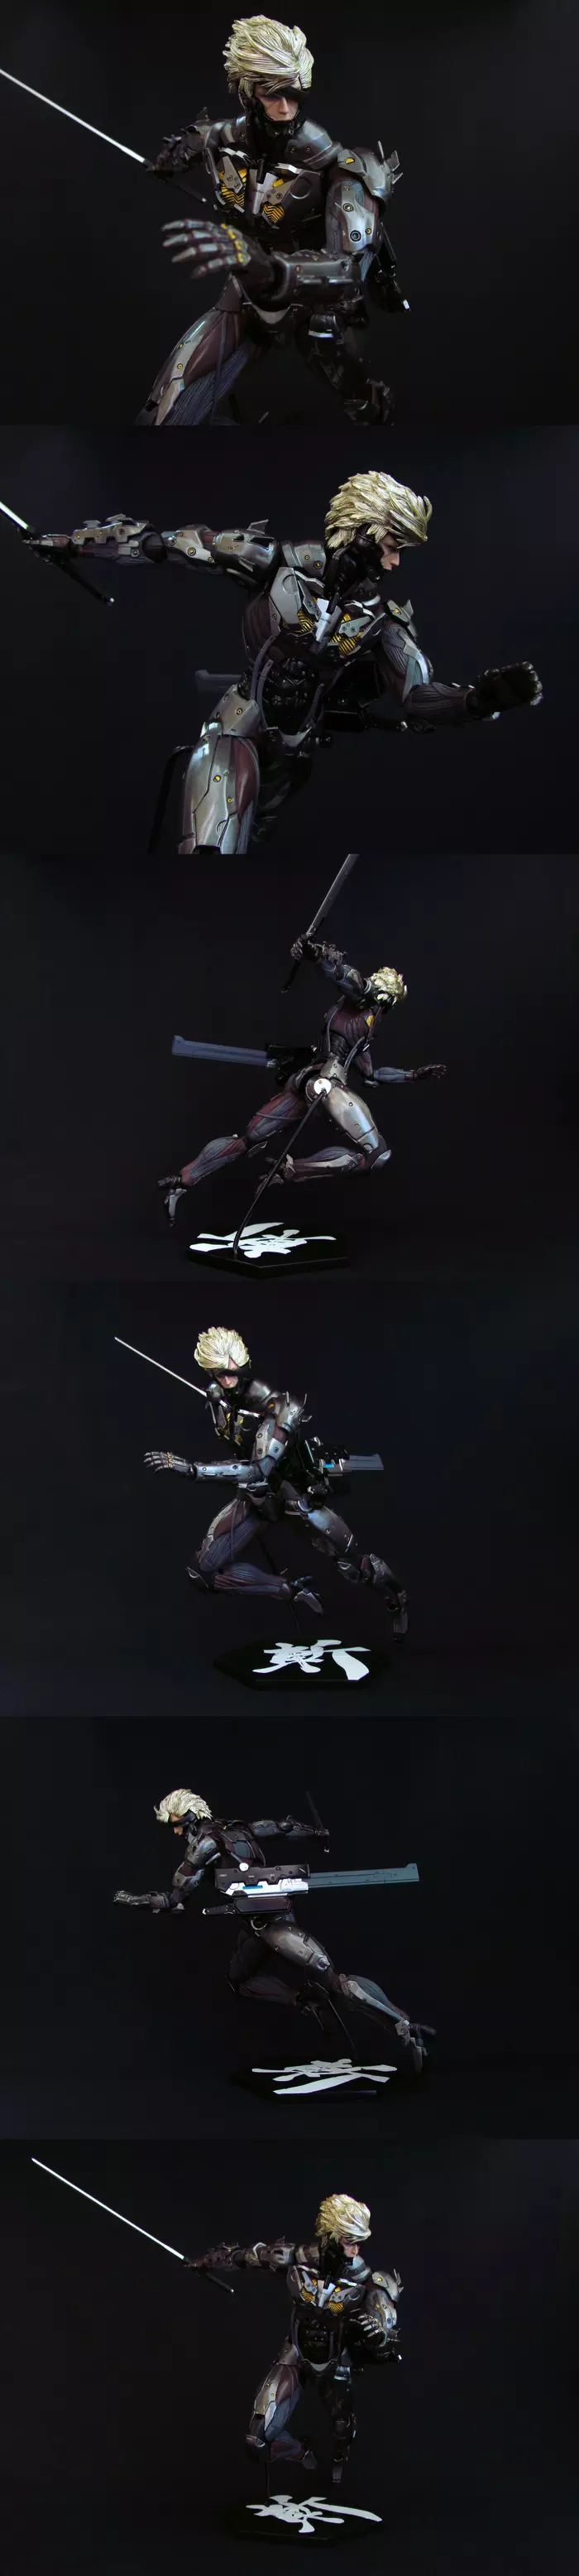 Metal Gear Rising: Revengeance - Limited Edition - My, Models, Figurine, Painting, Collector's Edition, Metal gear solid, Metal gear rising, Longpost, Figurines